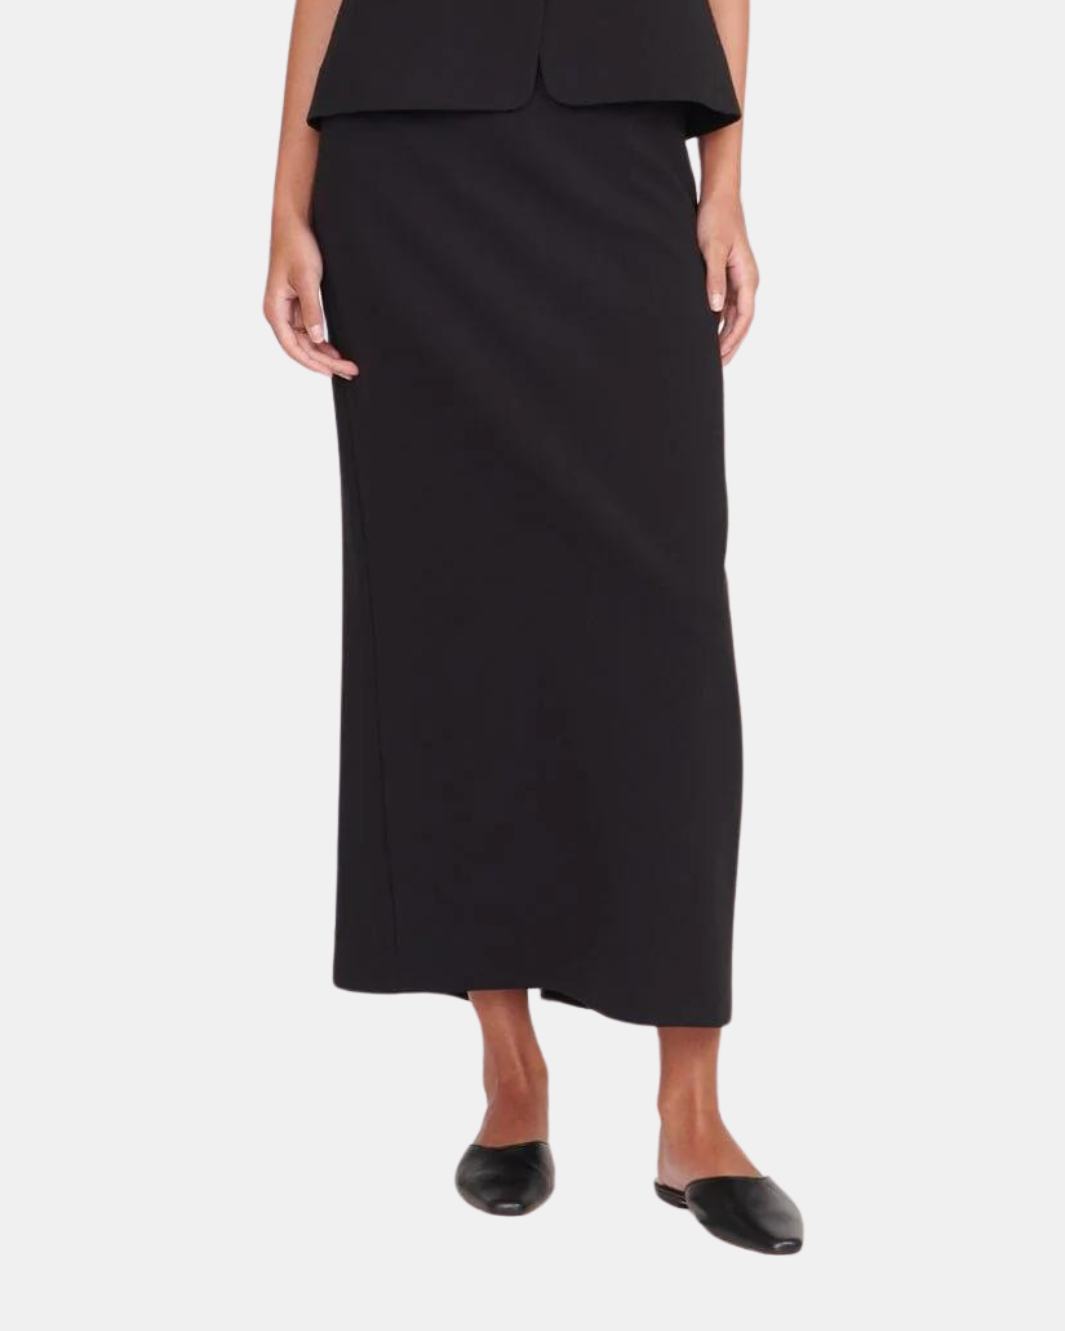 SMITH SKIRT IN BLACK - Romi Boutique